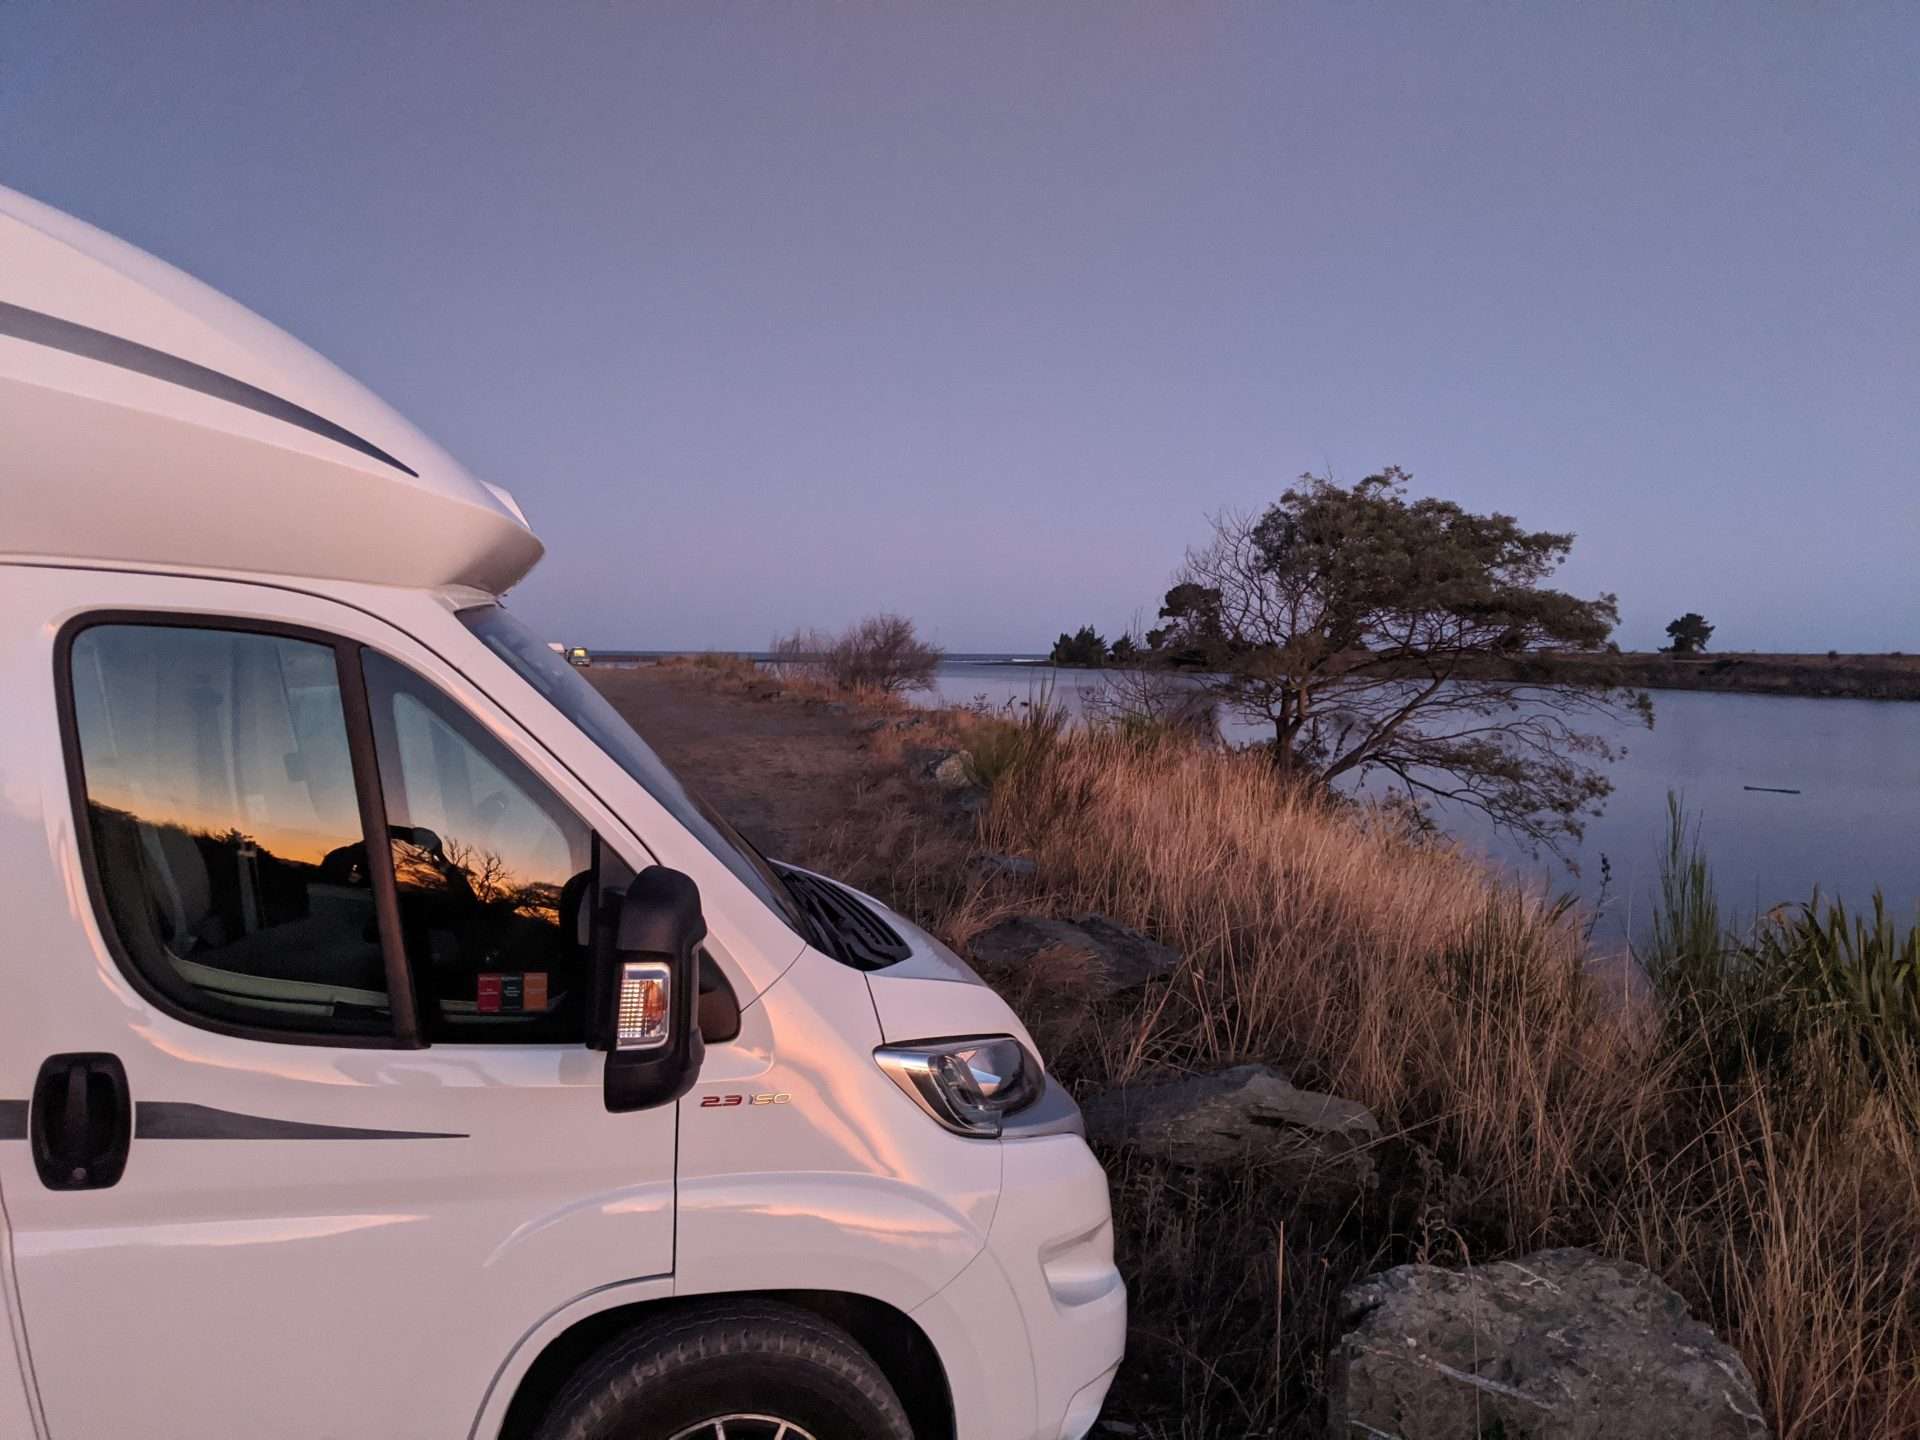 Campervan packed at sunset